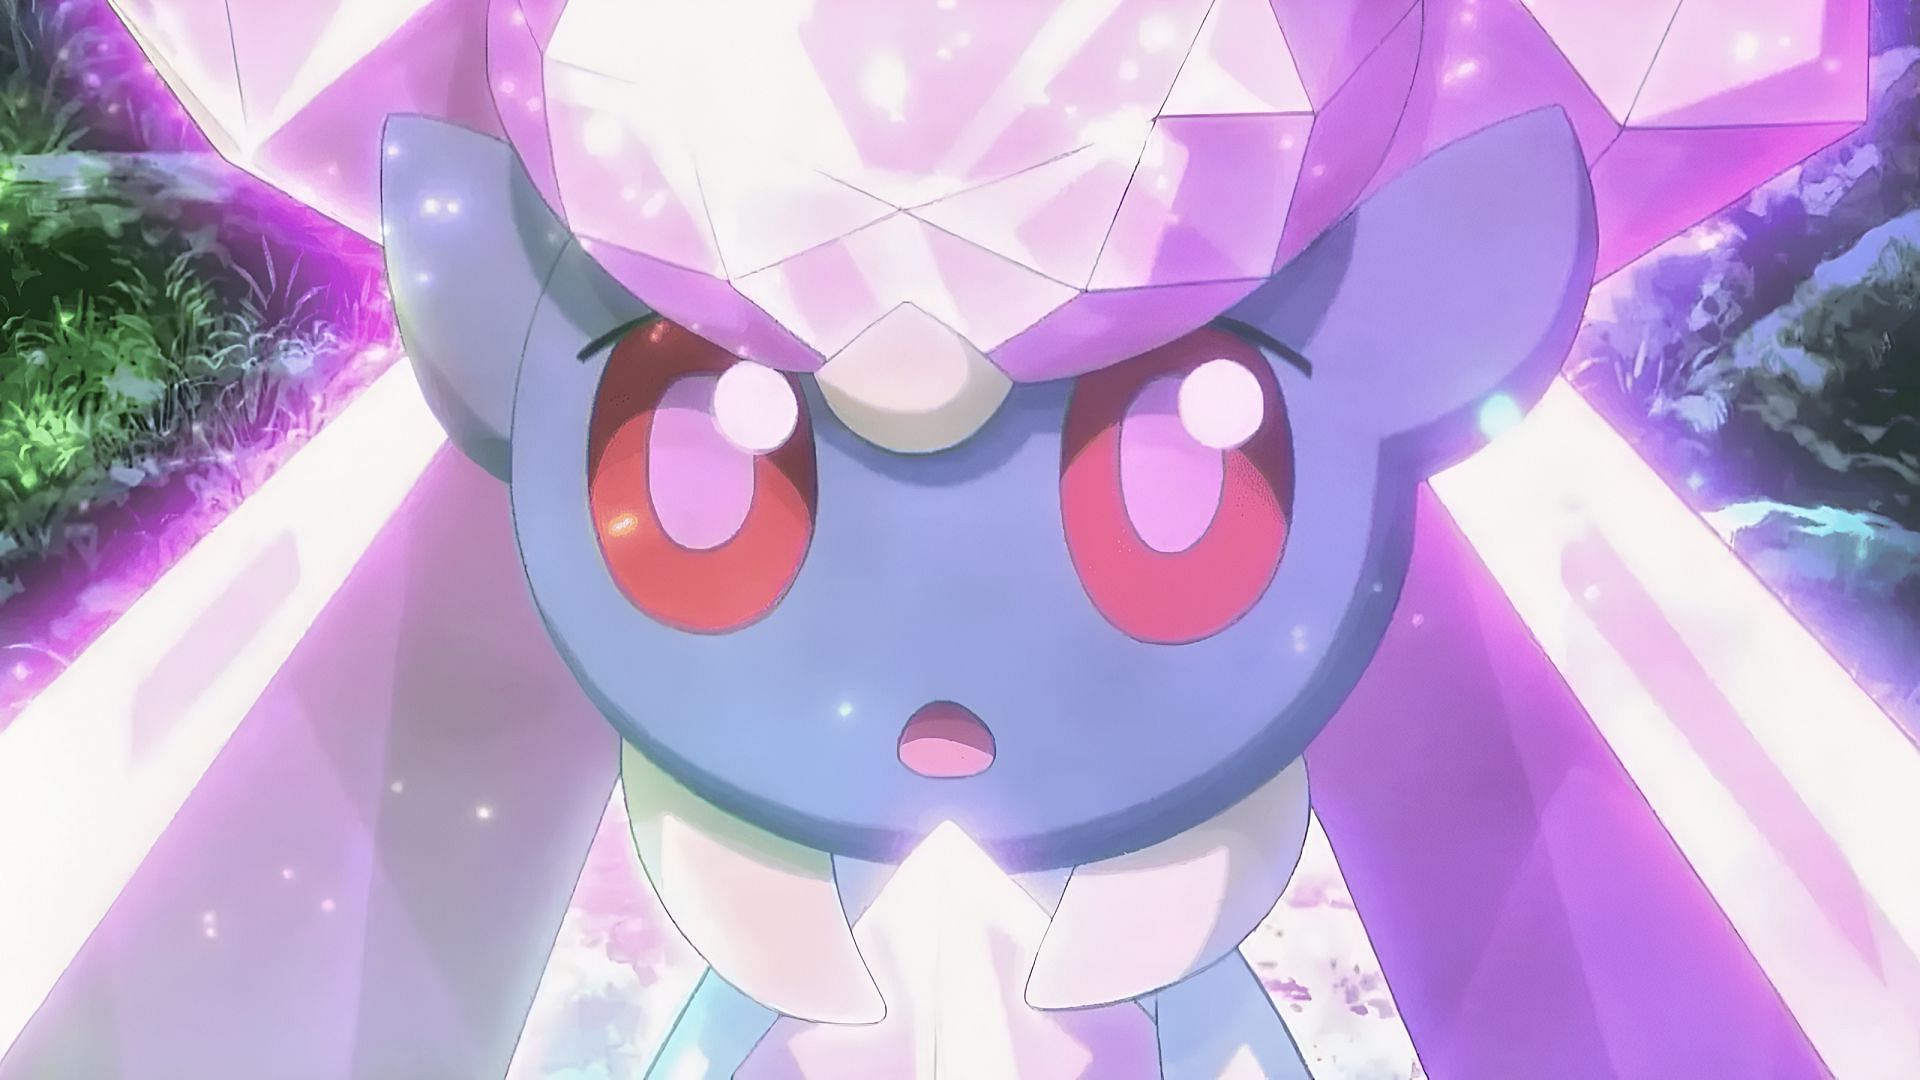 The Mythical Pokemon Diancie may arrive during Pokemon GO Fest 2023 according to leaks (Image via The Pokemon Company)